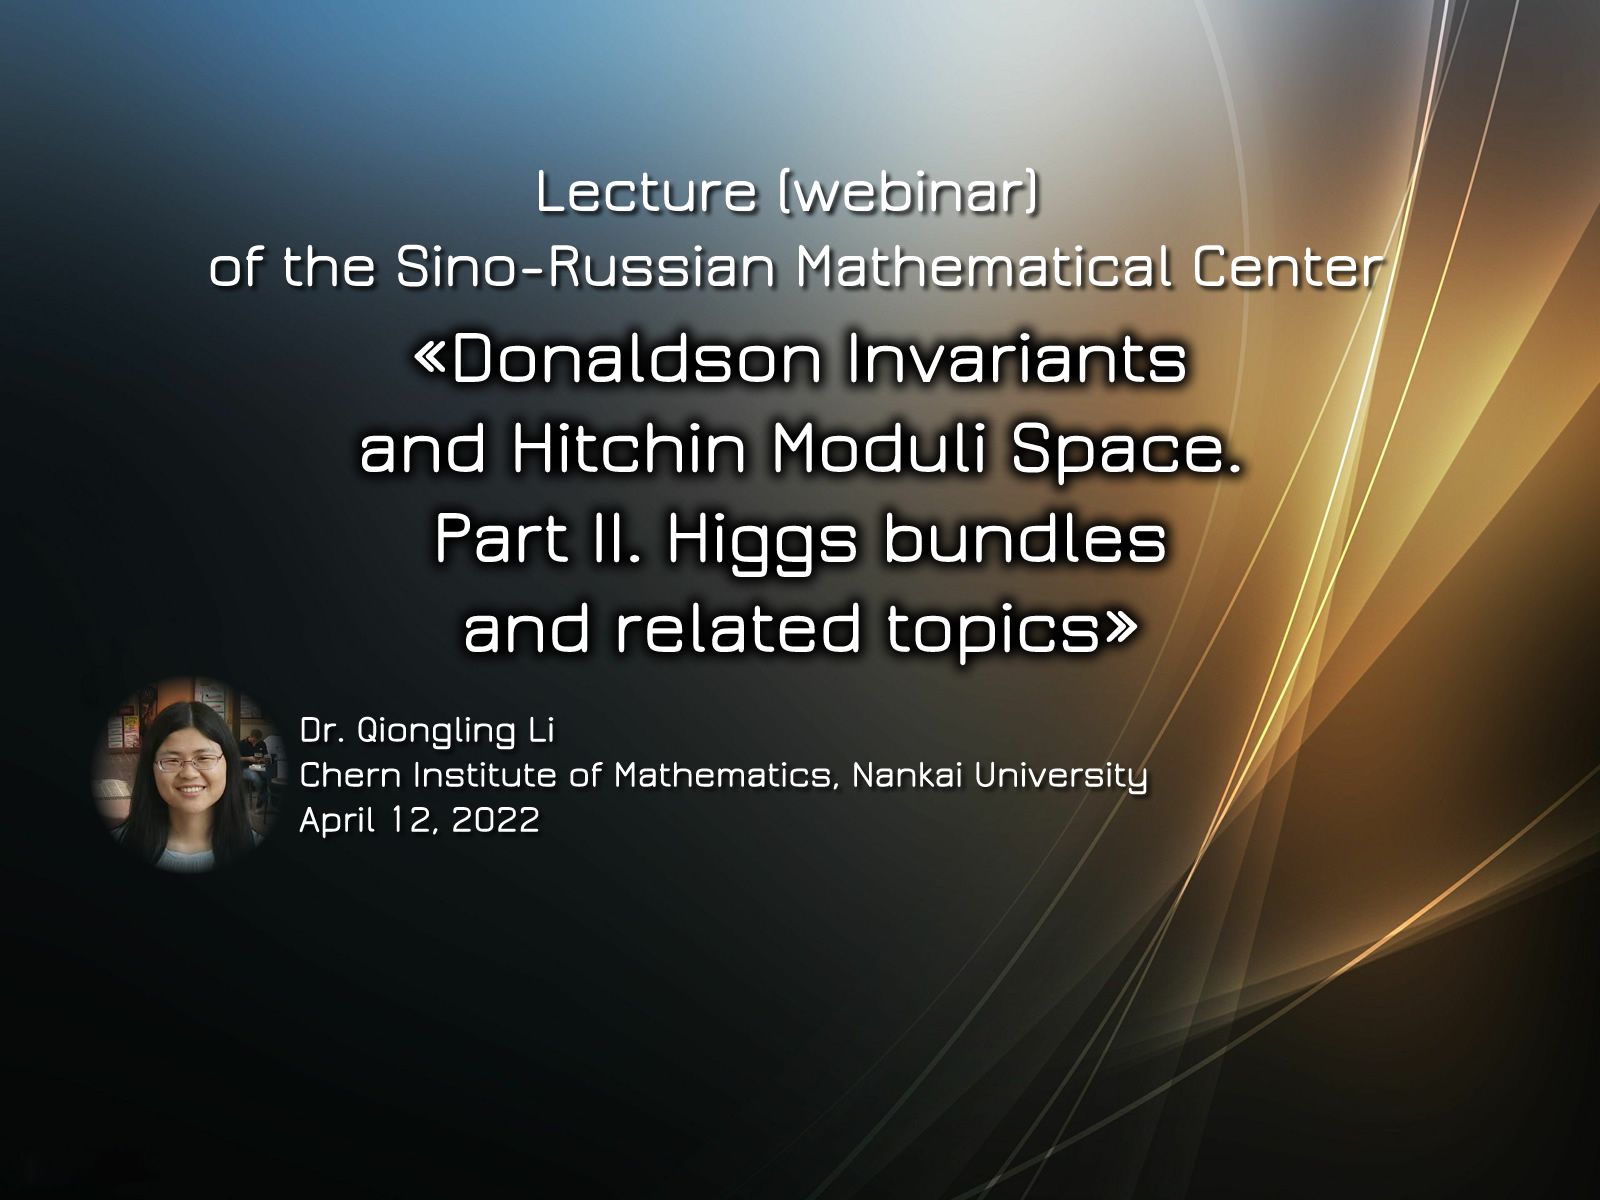 «Higgs bundles and related topics» 12.04.2022